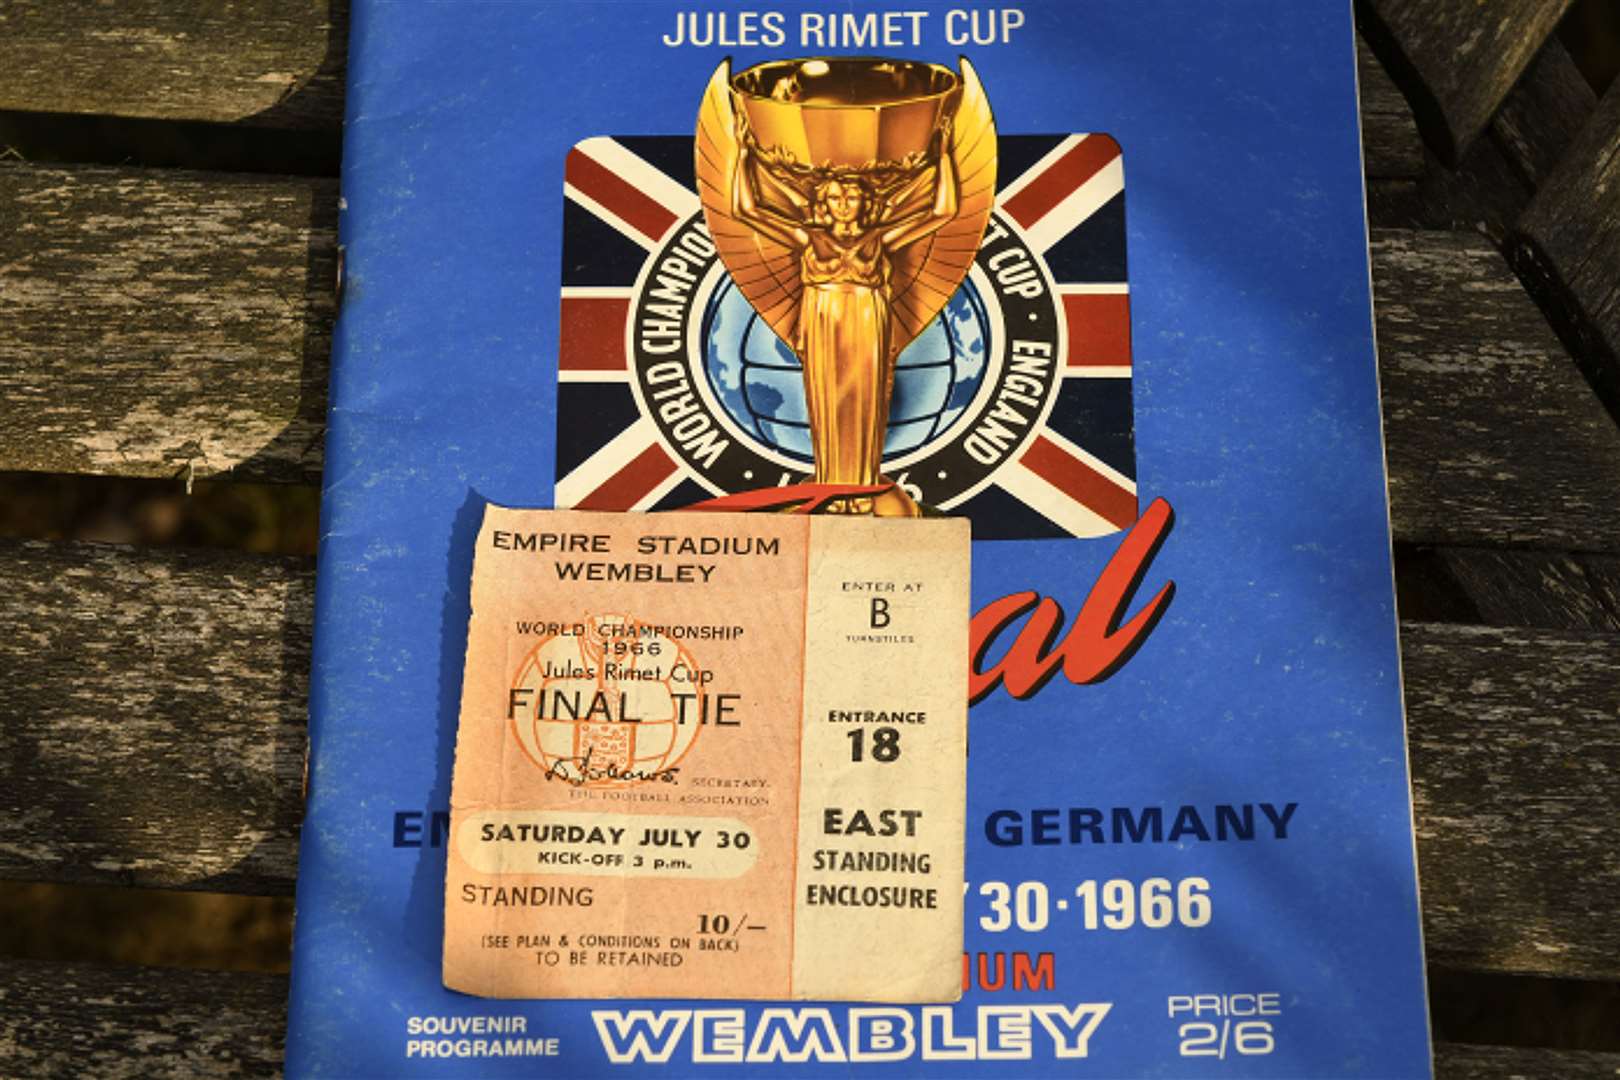 A ticket for the final was like gold dust as England looked to claim glory on home soil